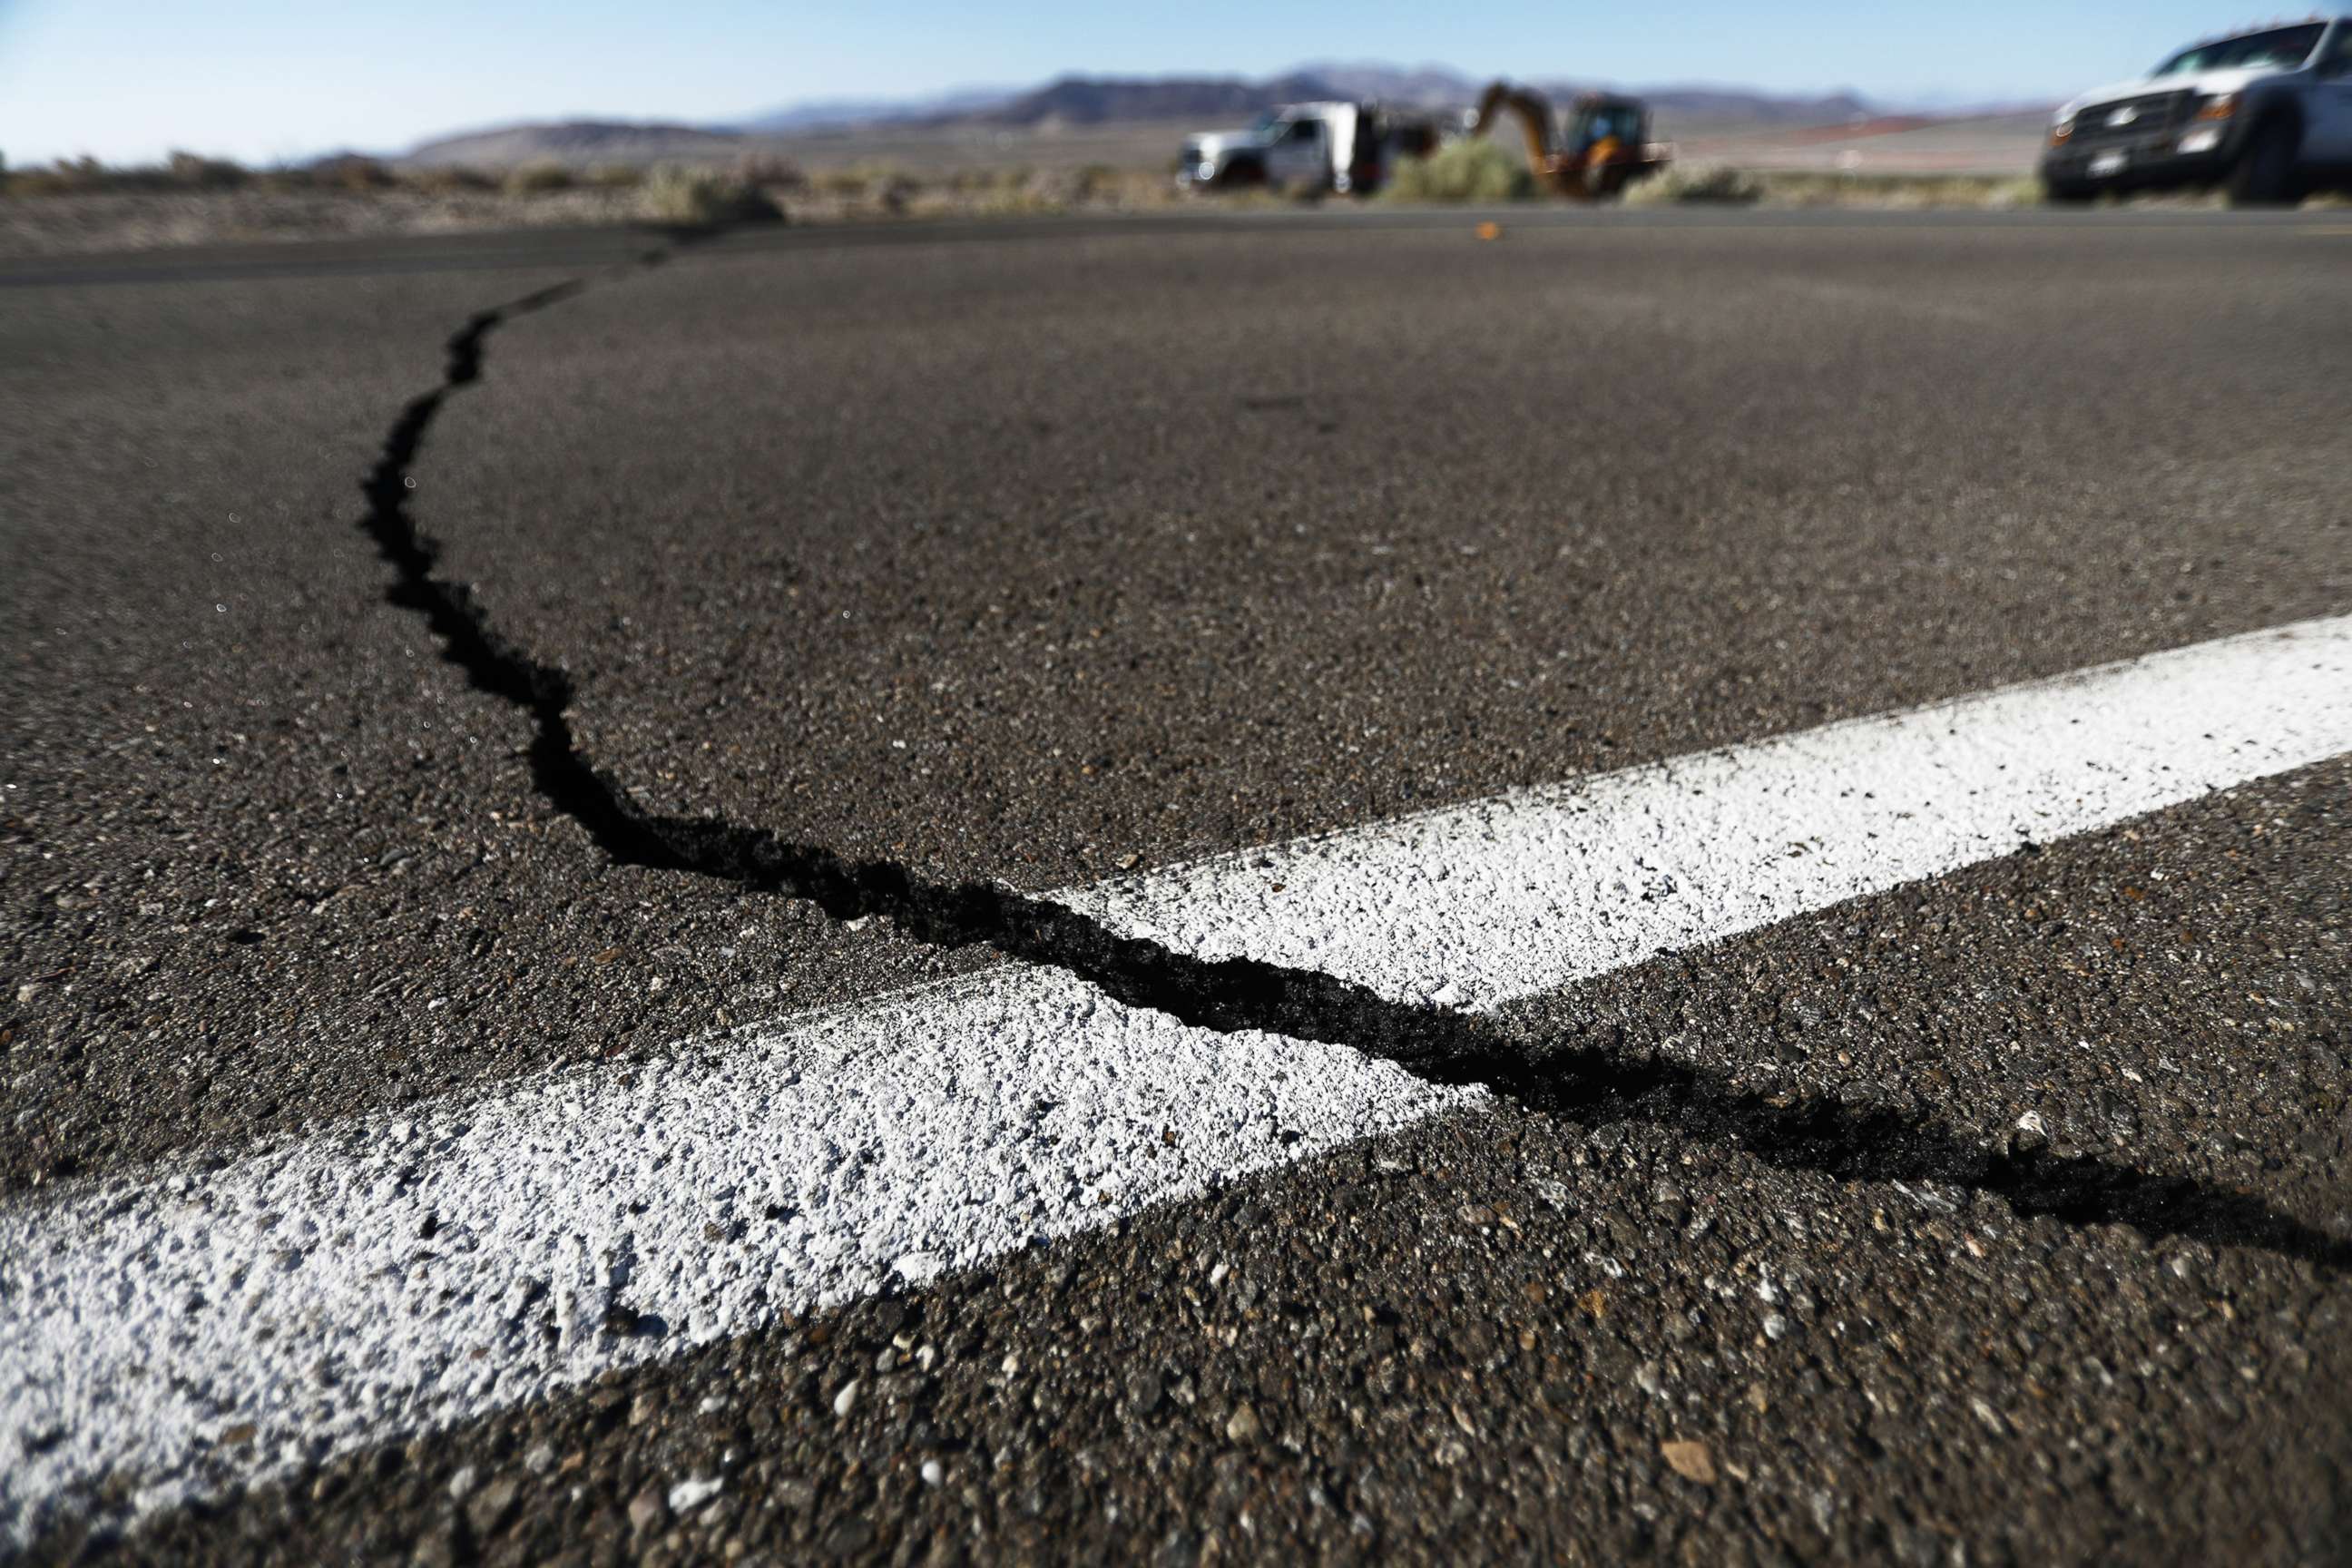 PHOTO: A crack stretches across the road after a 6.4 magnitude earthquake struck the area on July 4, 2019, near Ridgecrest, Calif.